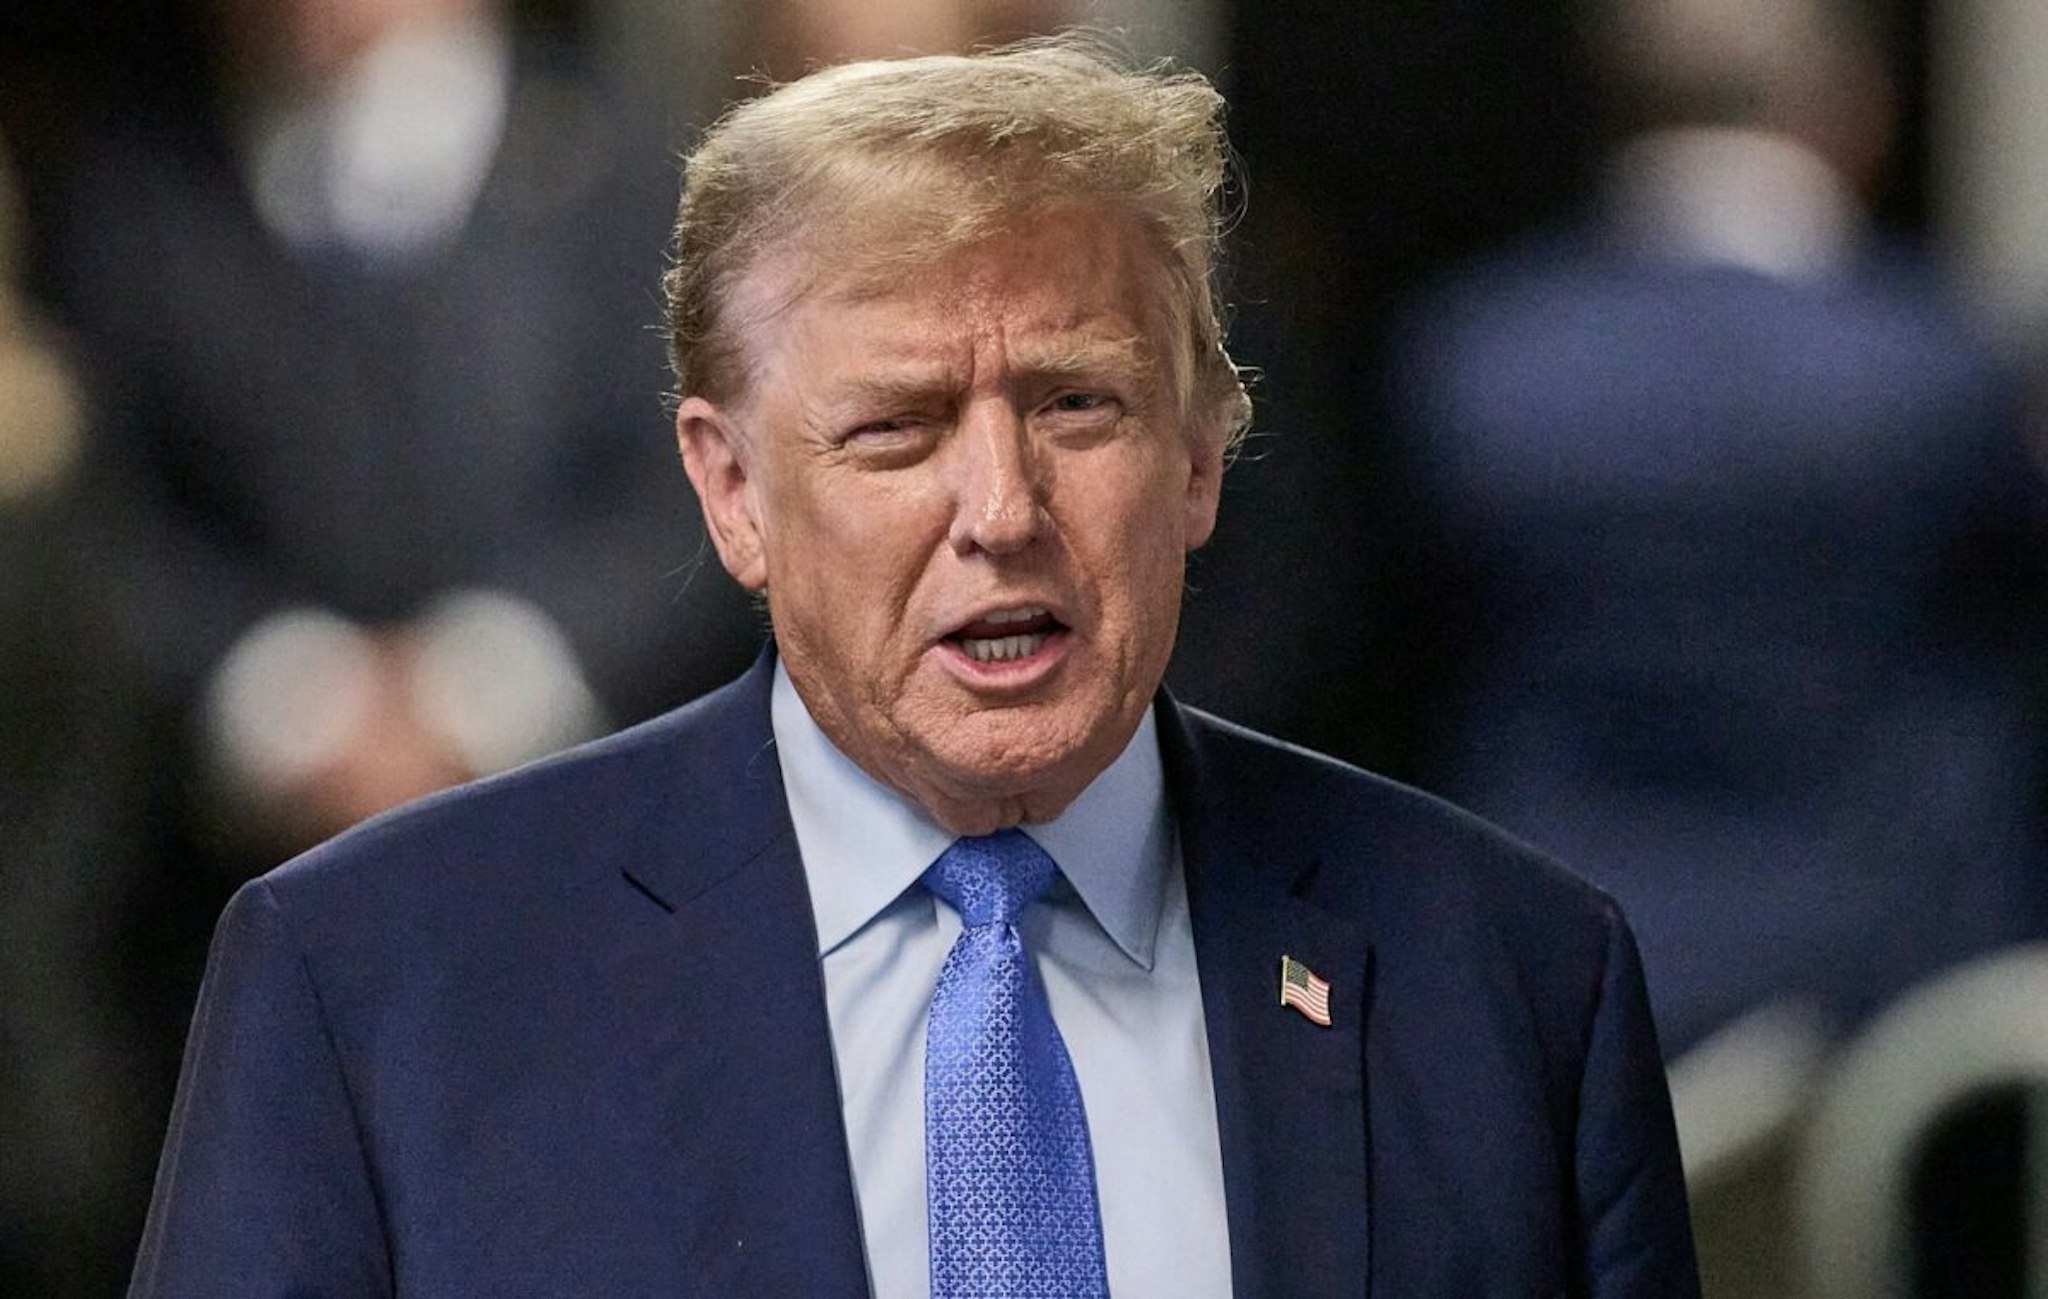 NEW YORK, NEW YORK - APRIL 26: Former U.S. President Donald Trump speaks to the media at the end of the day of his trial for allegedly covering up hush money payments at Manhattan Criminal Court on April 26, 2024 in New York City. Former U.S. President Donald Trump faces 34 felony counts of falsifying business records in the first of his criminal cases to go to trial.